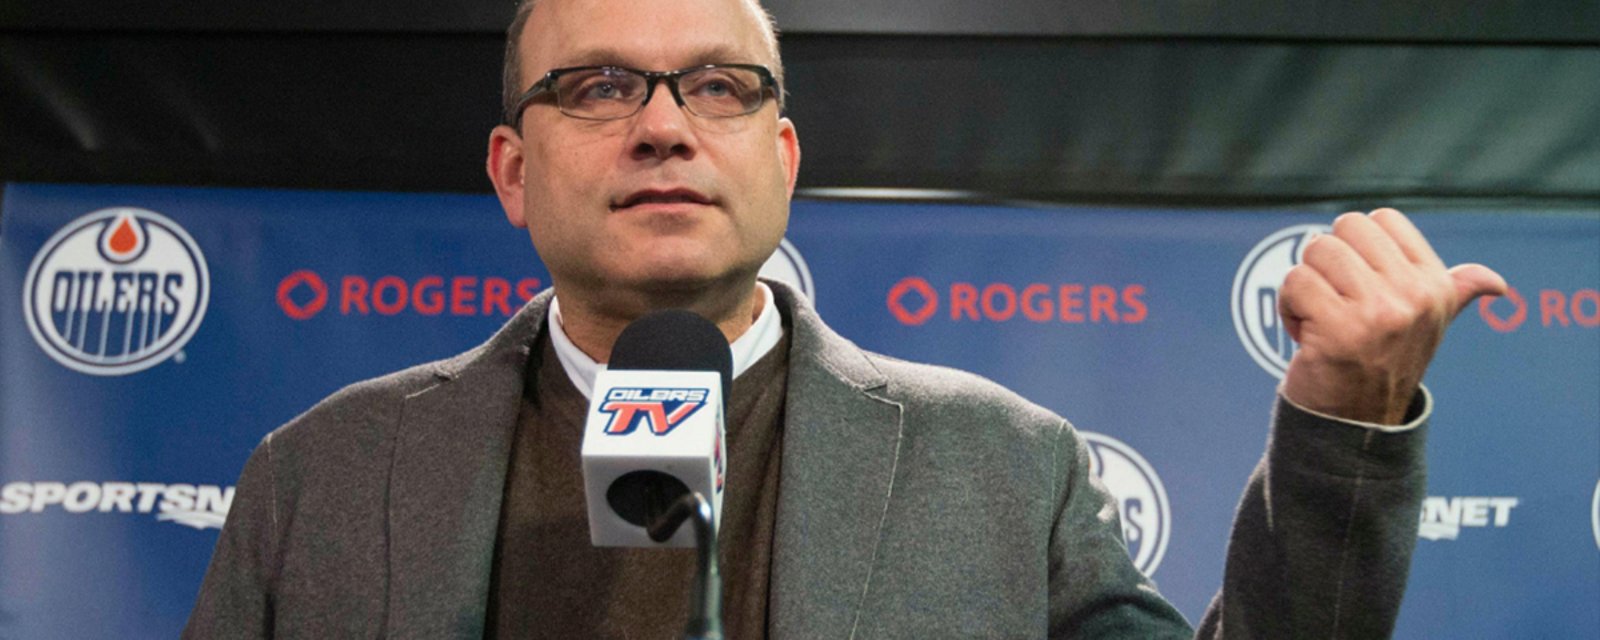 Former NHLer mocks Chiarelli for trading him in another brutal one for one deal